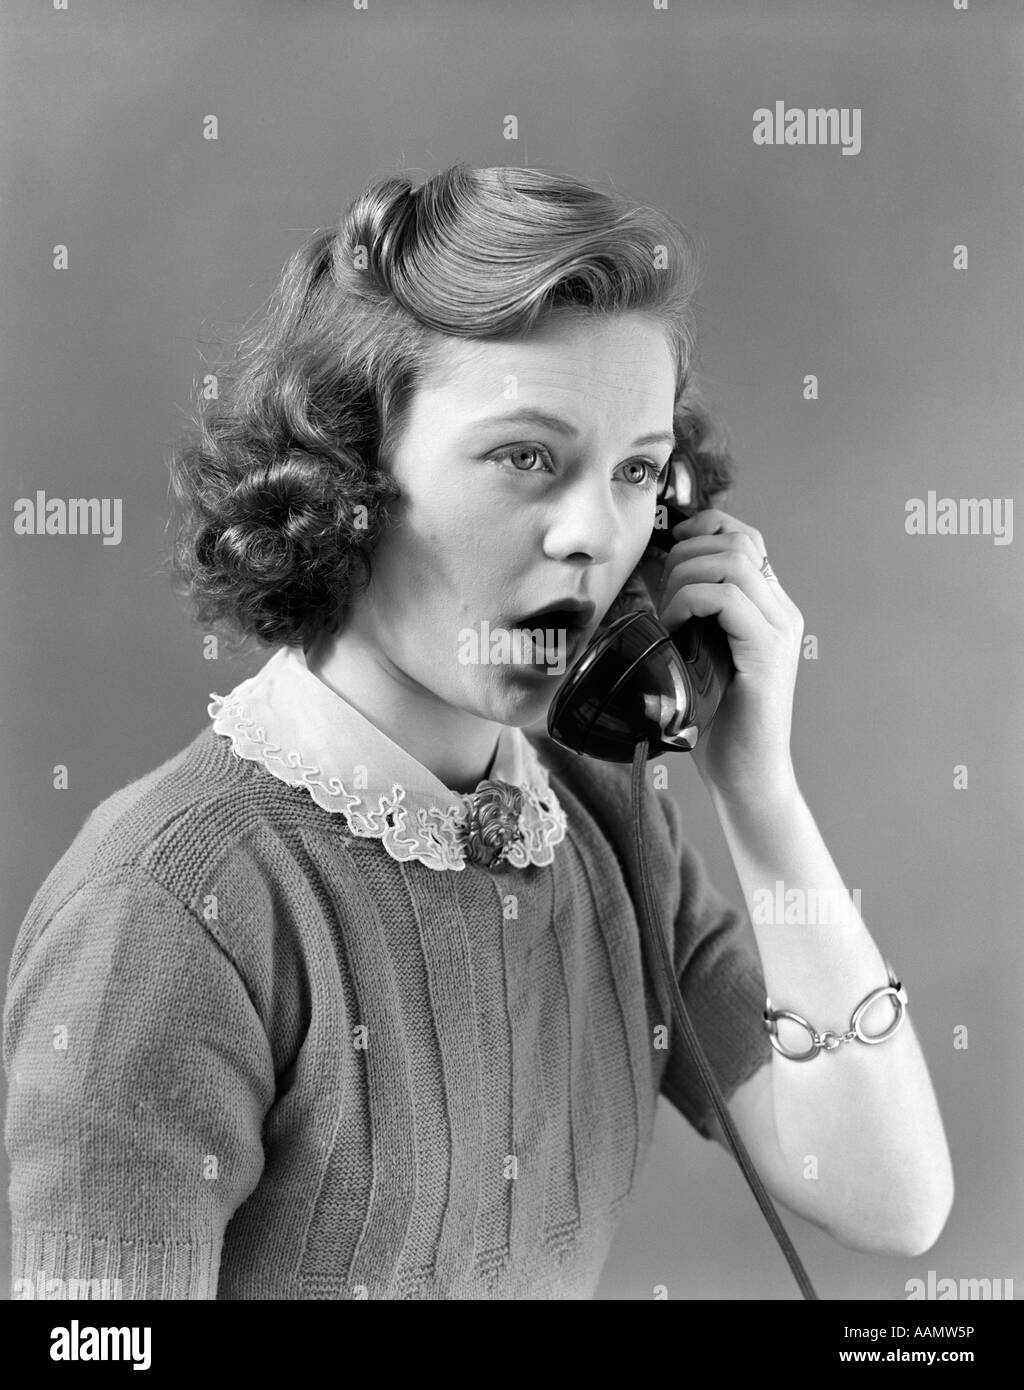 1940s YOUNG GIRL TALKING ON TELEPHONE Stock Photo